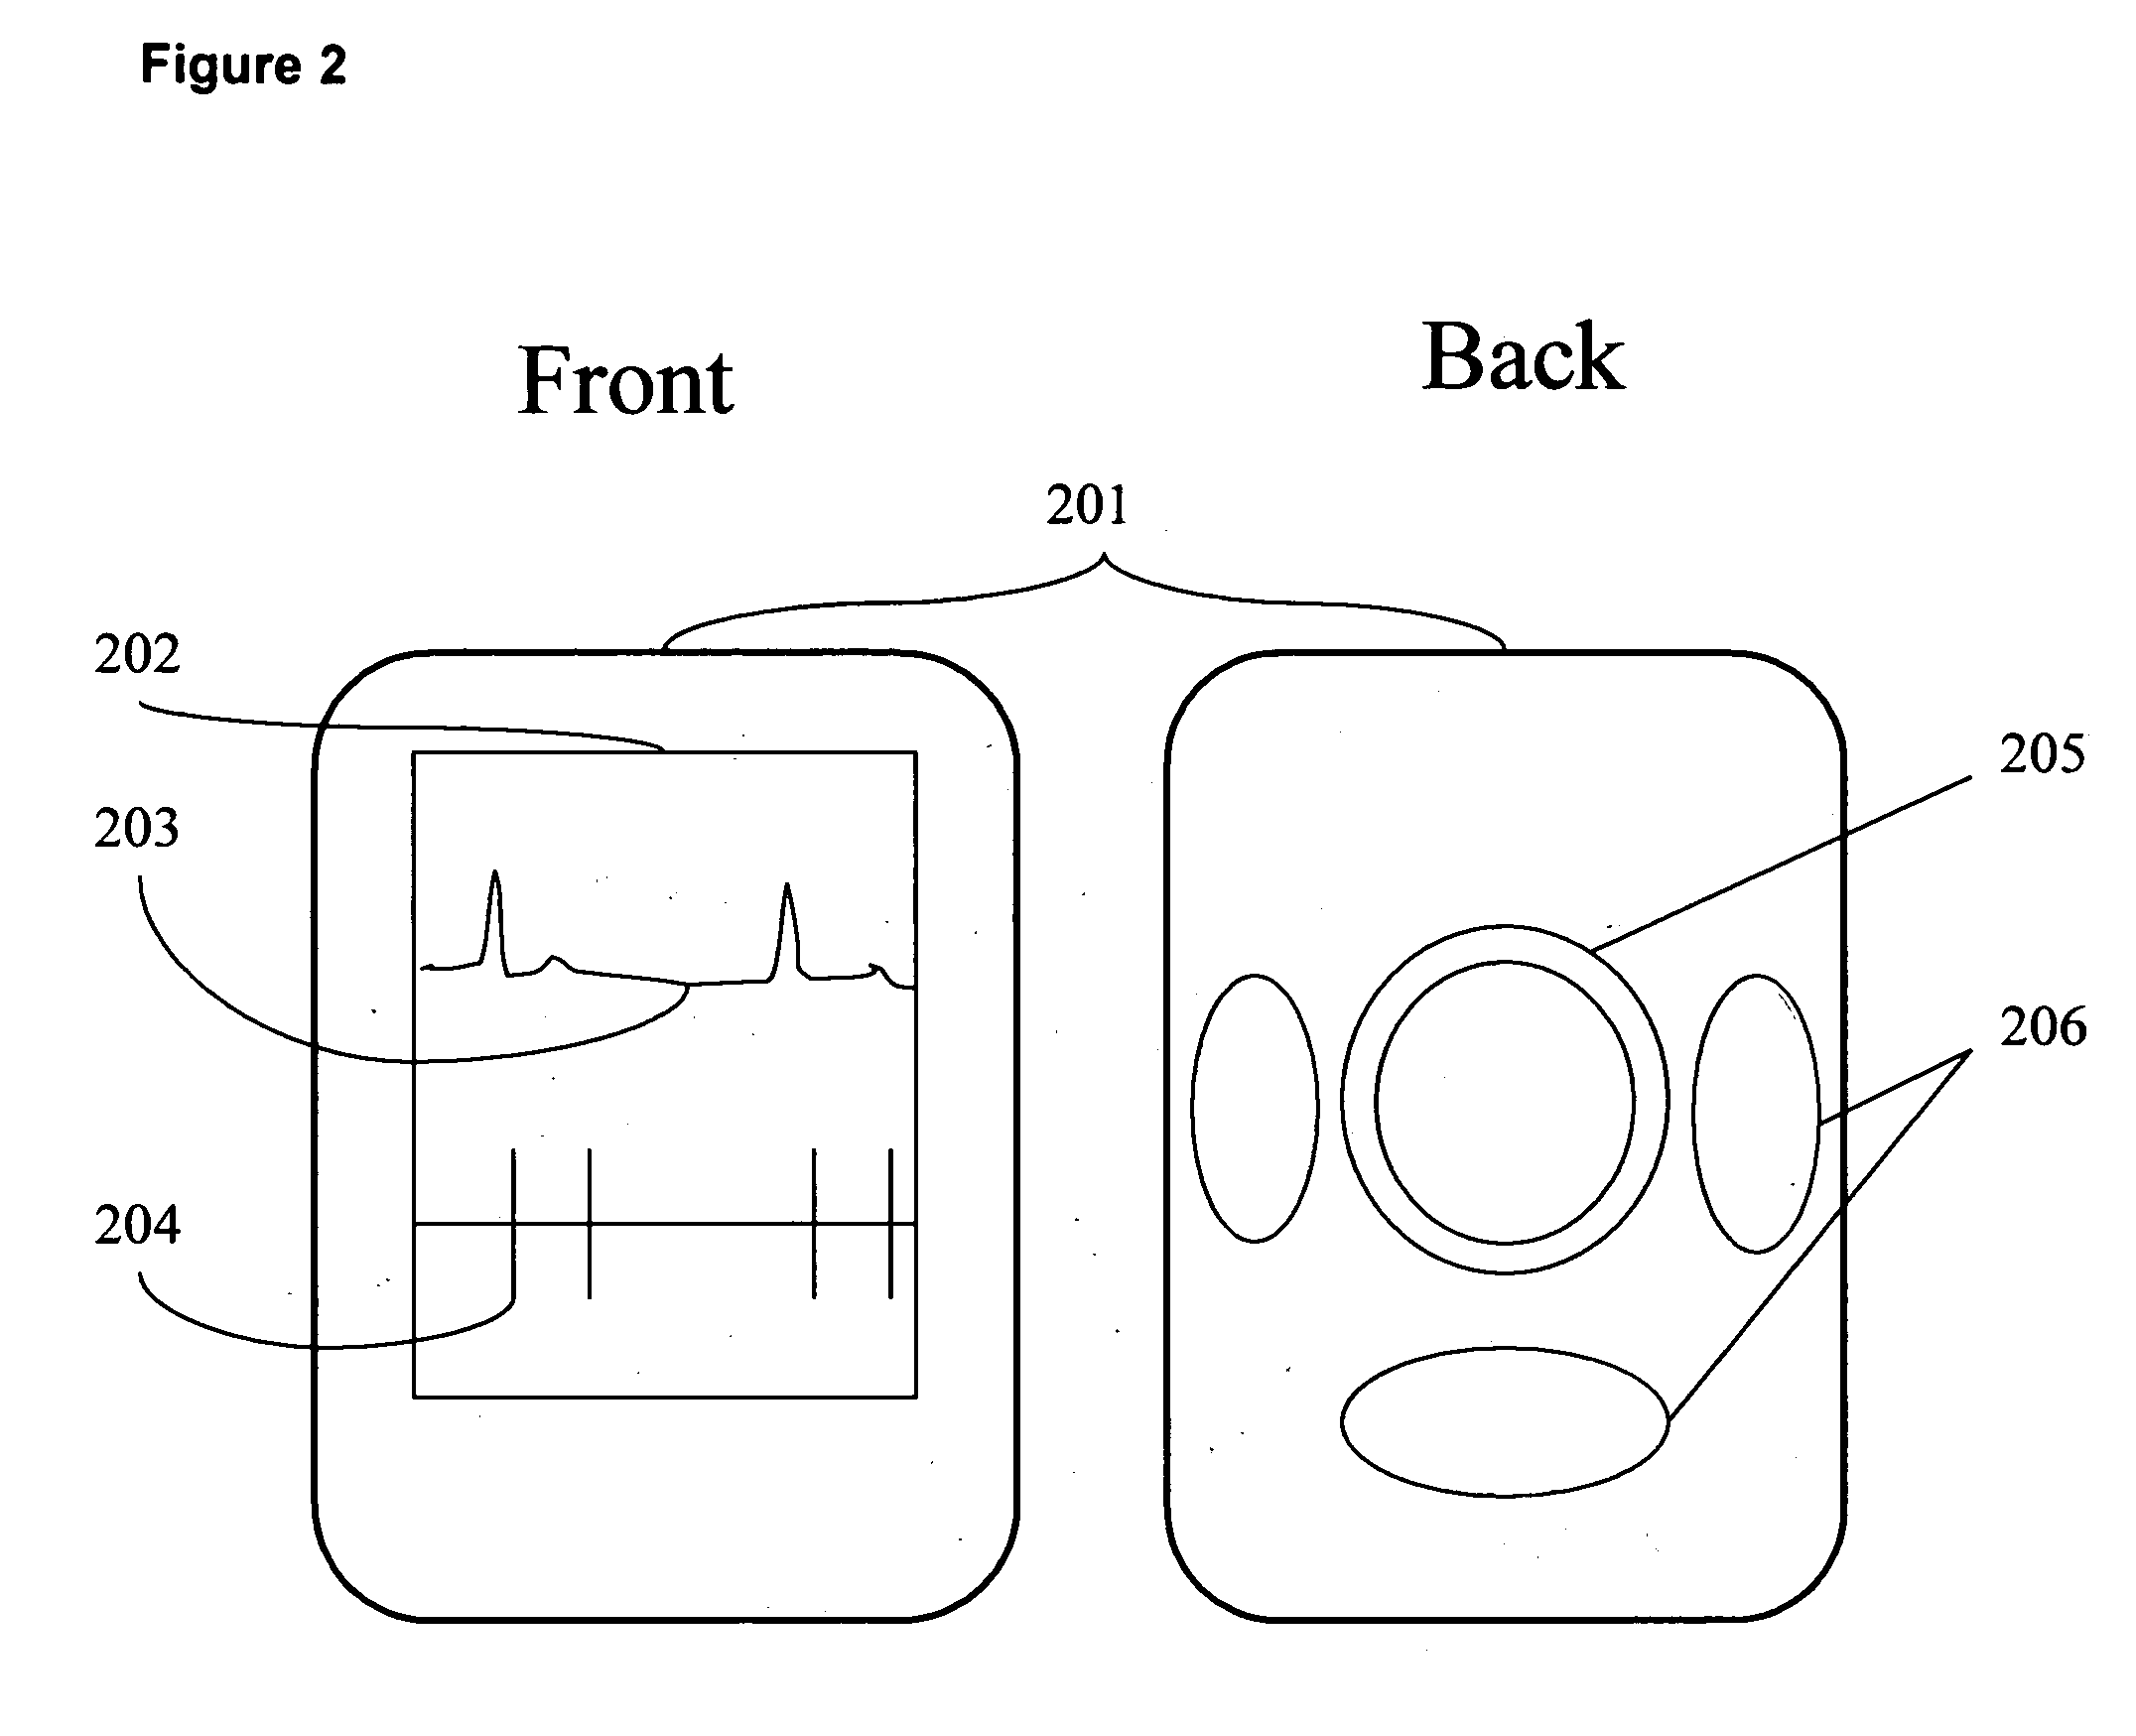 Physiological data recording apparatus for single handed application